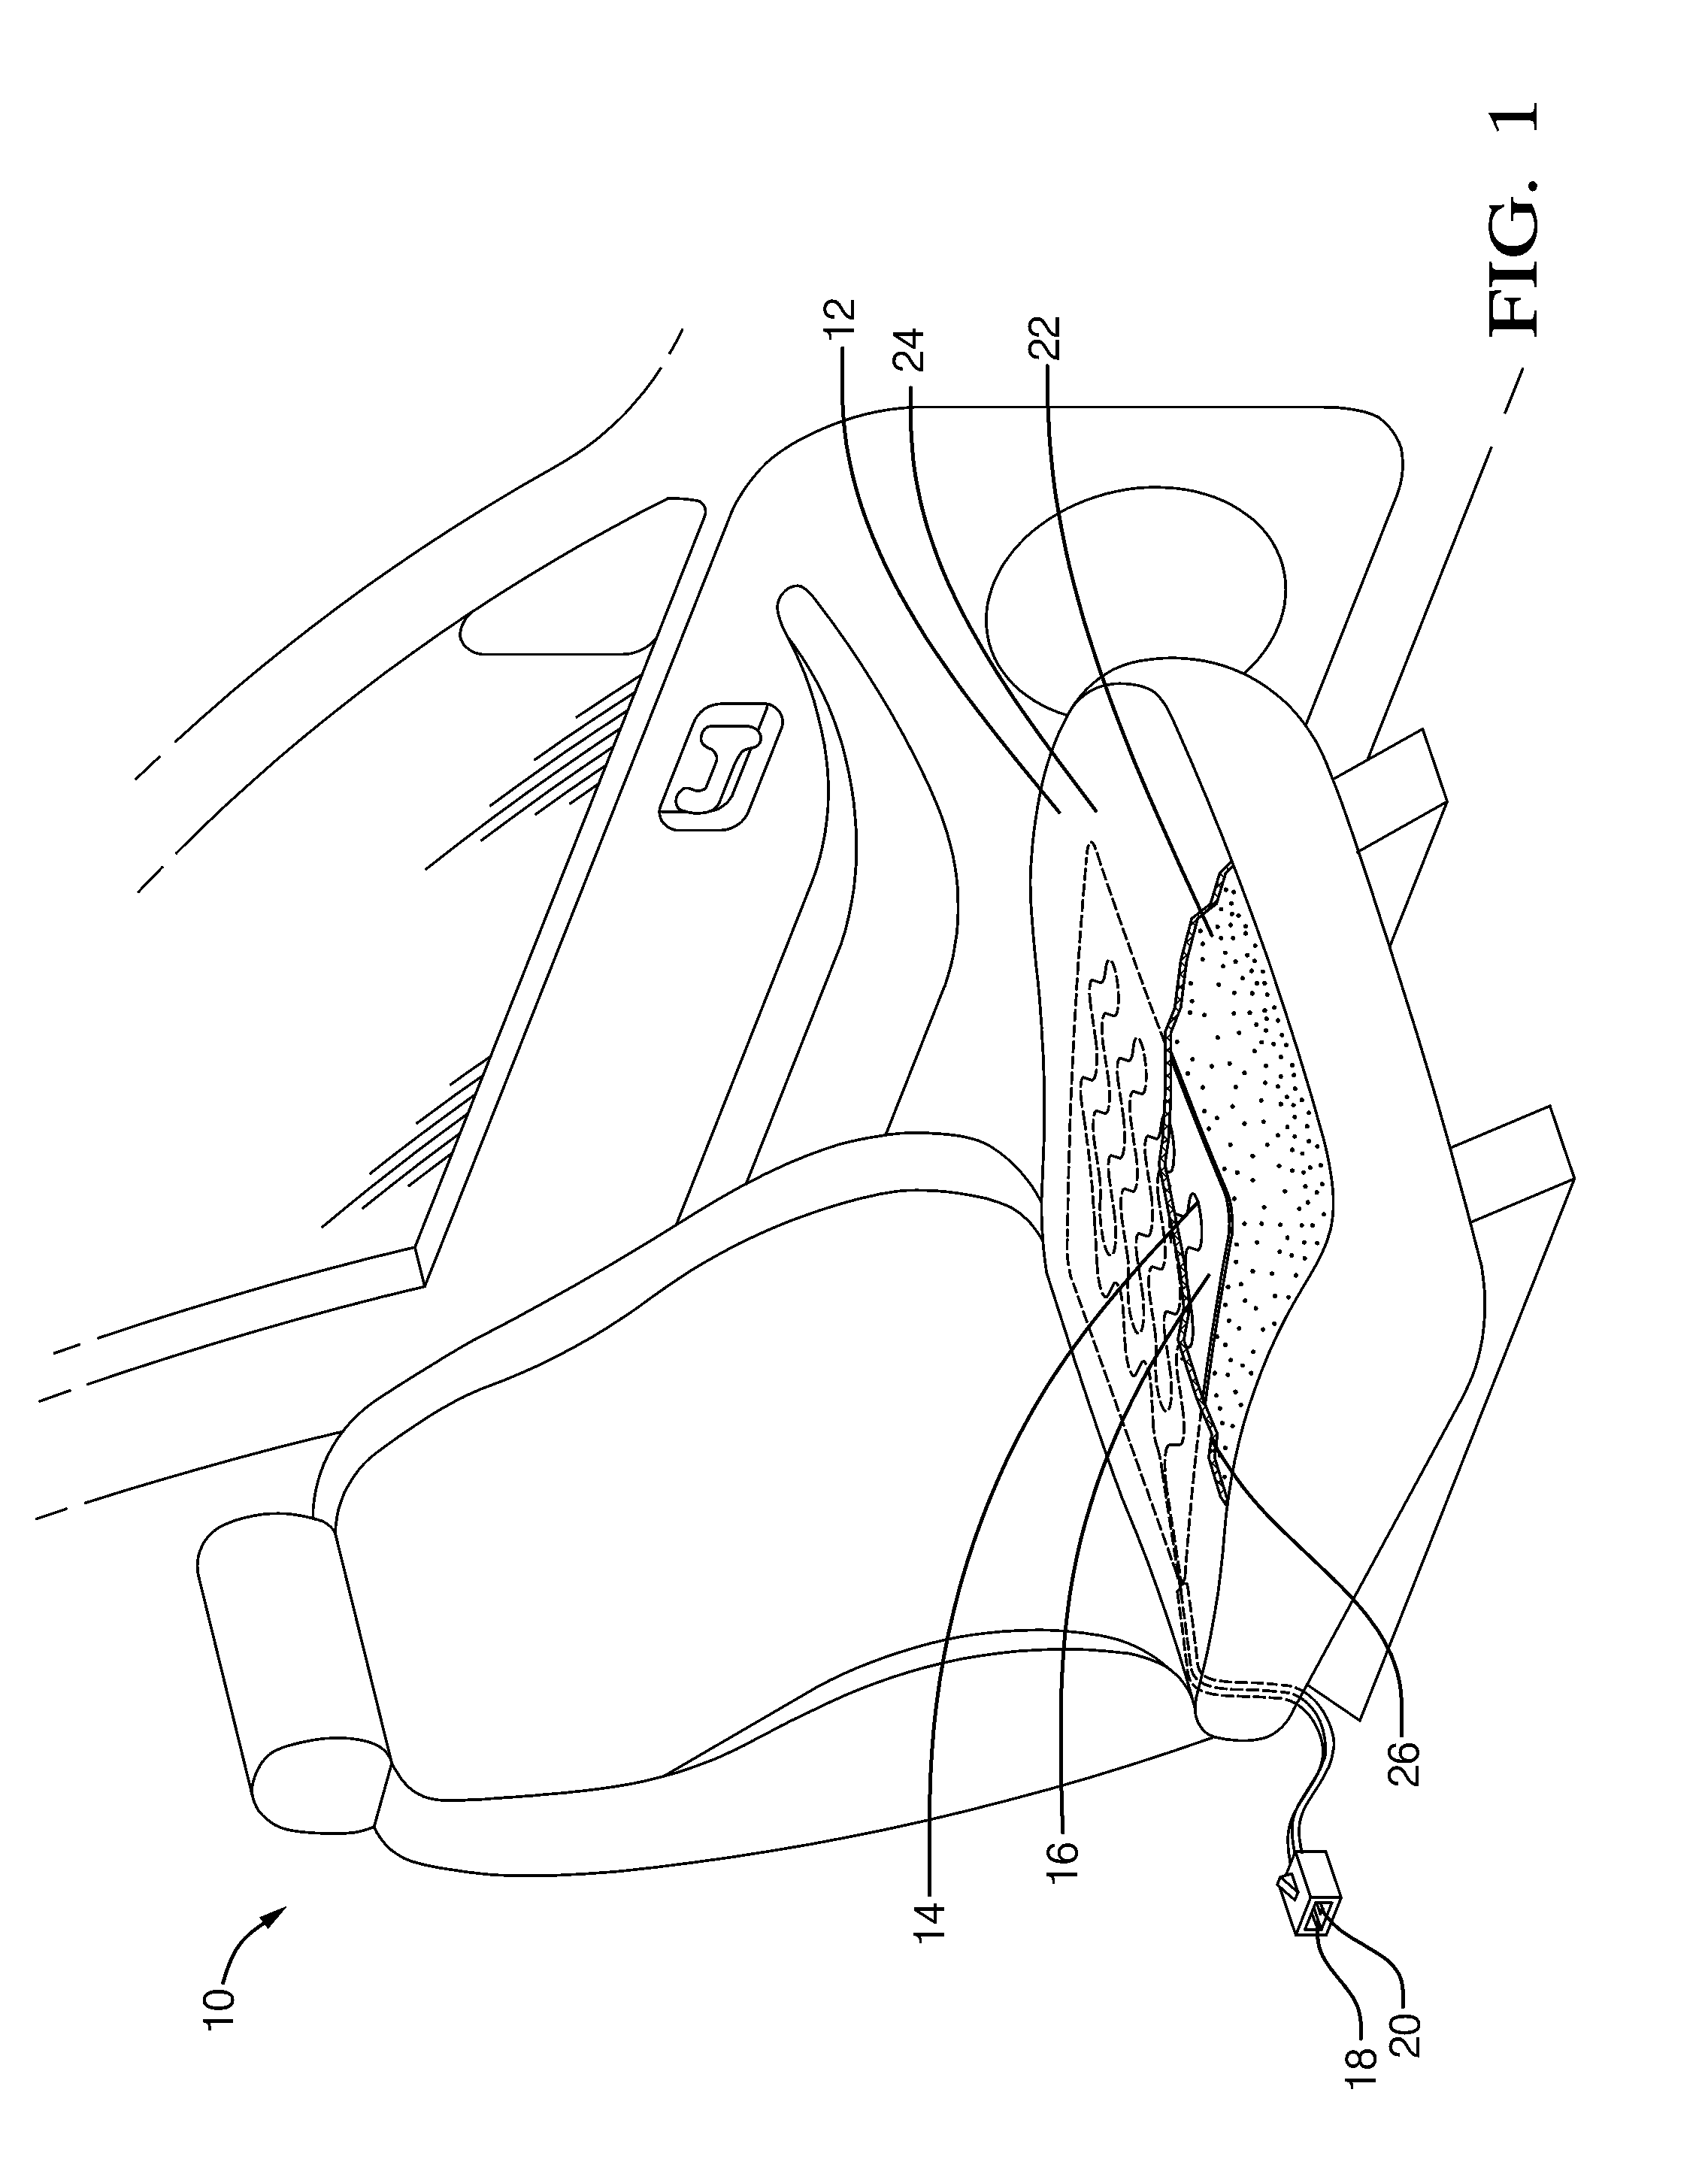 Seat Assembly Having Seat Heating and Occupant Detection